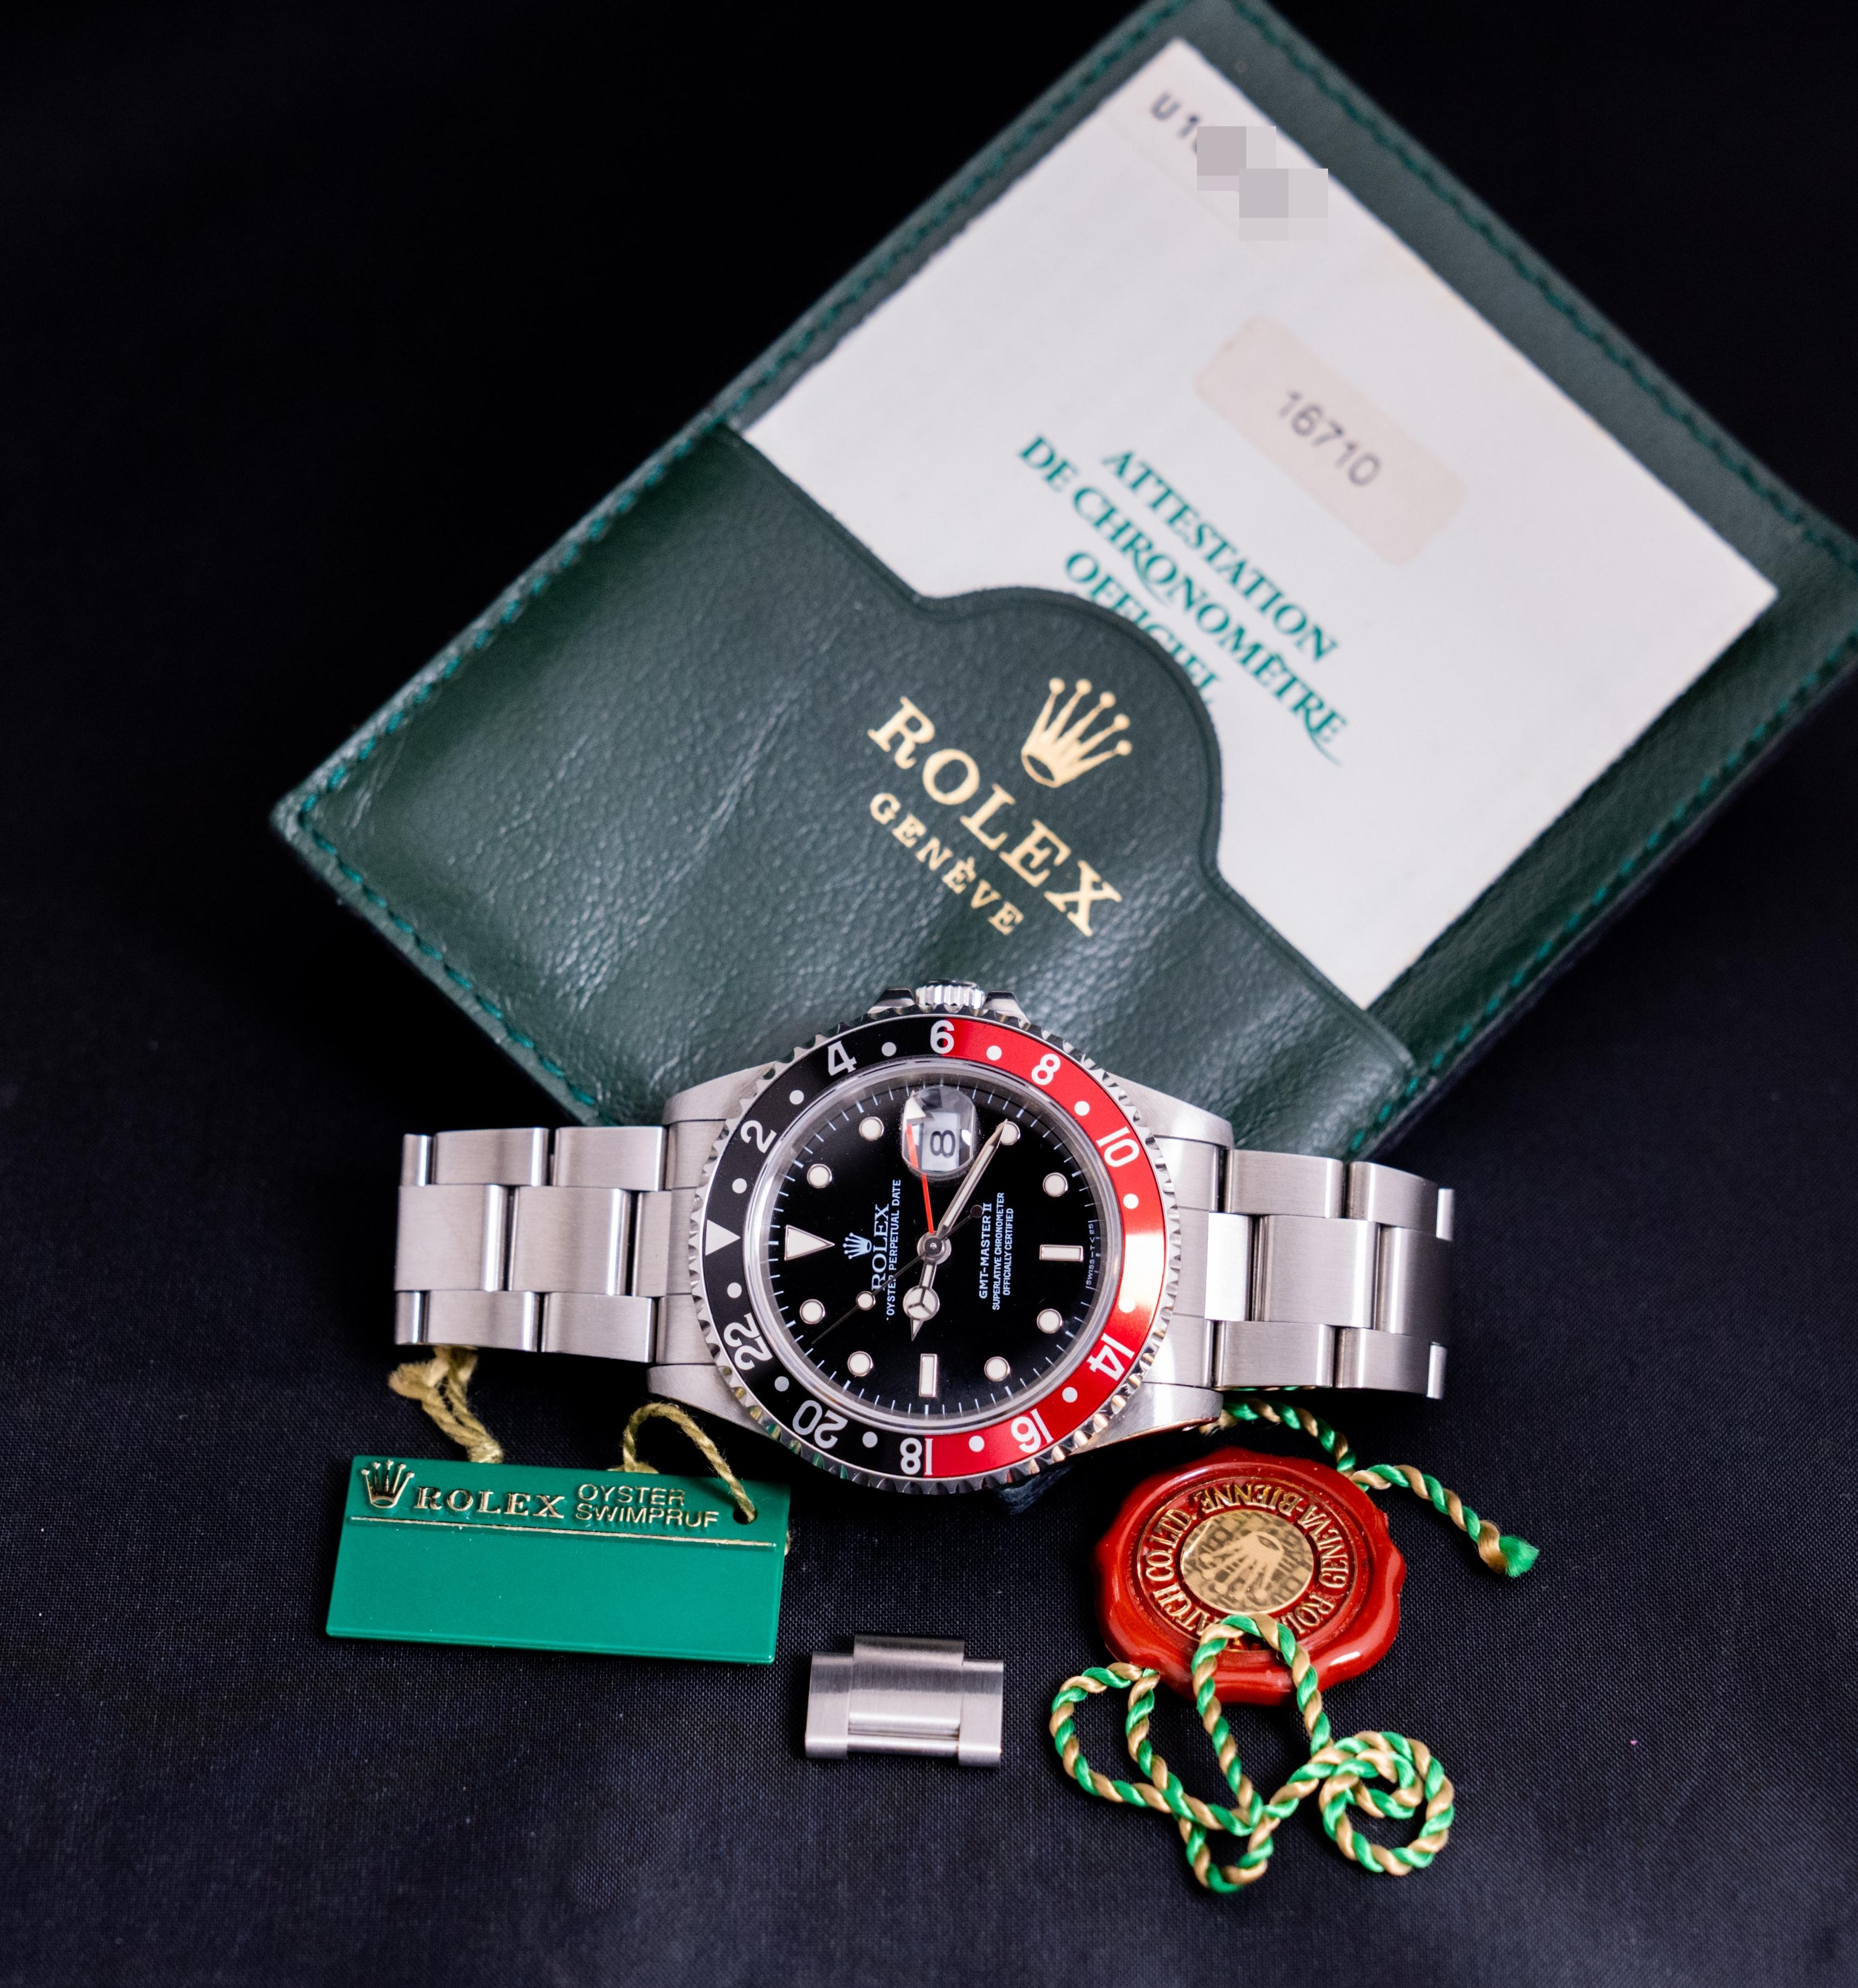 Brand: Rolex
Model: 16710
Year: 1997
Serial number: U1xxxxx
Reference: C03976

Case: Show sign of wear w/ slight polish from previous ; inner case back stamped 16710

Dial: Excellent Condition Black Tritium Dial where the lumes have turned into